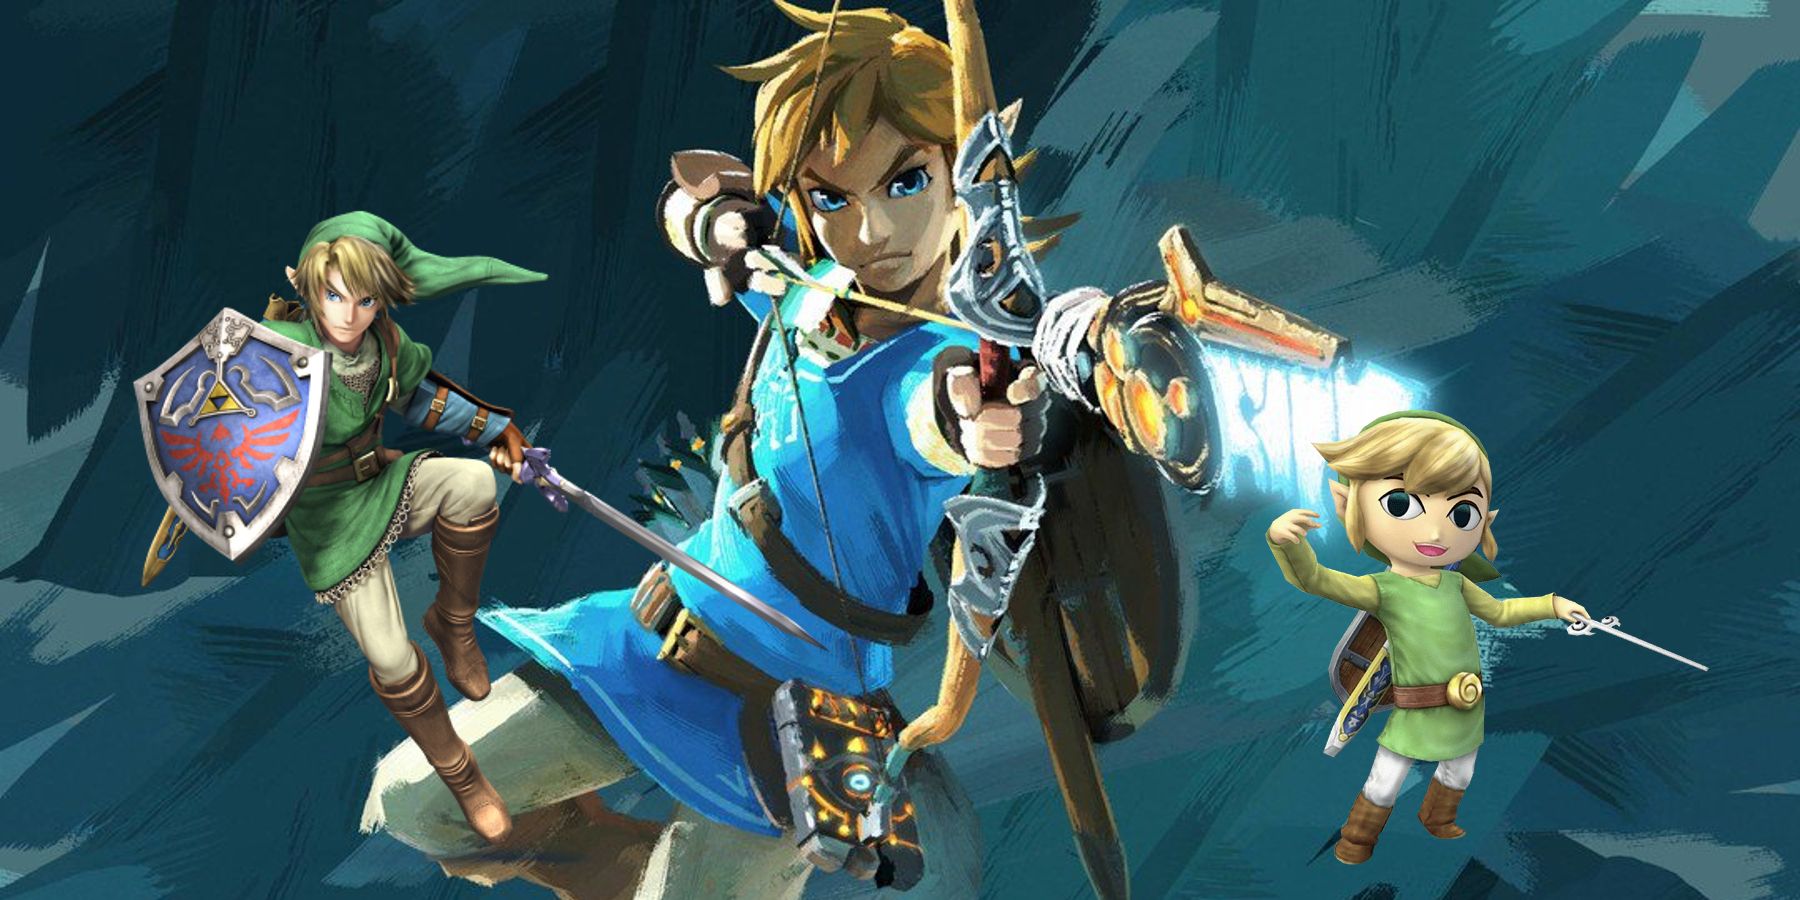 Zelda Breath of the Wild 2: Ganon, Flamethrowers, and More E3